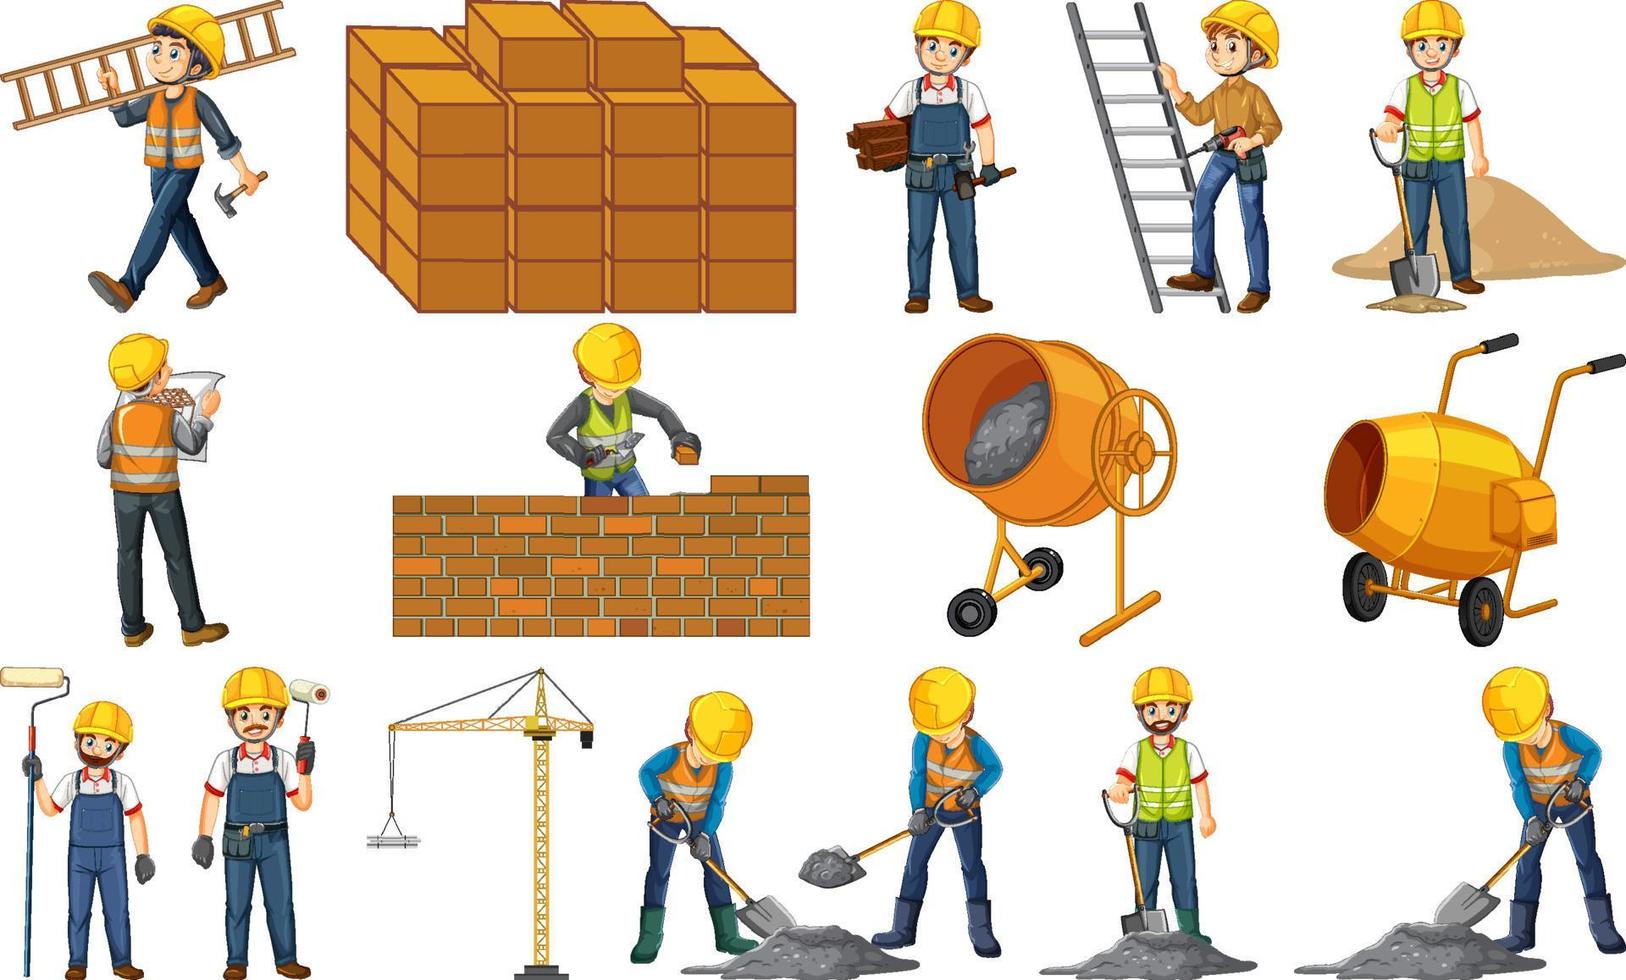 Construction worker set with man and tools vector